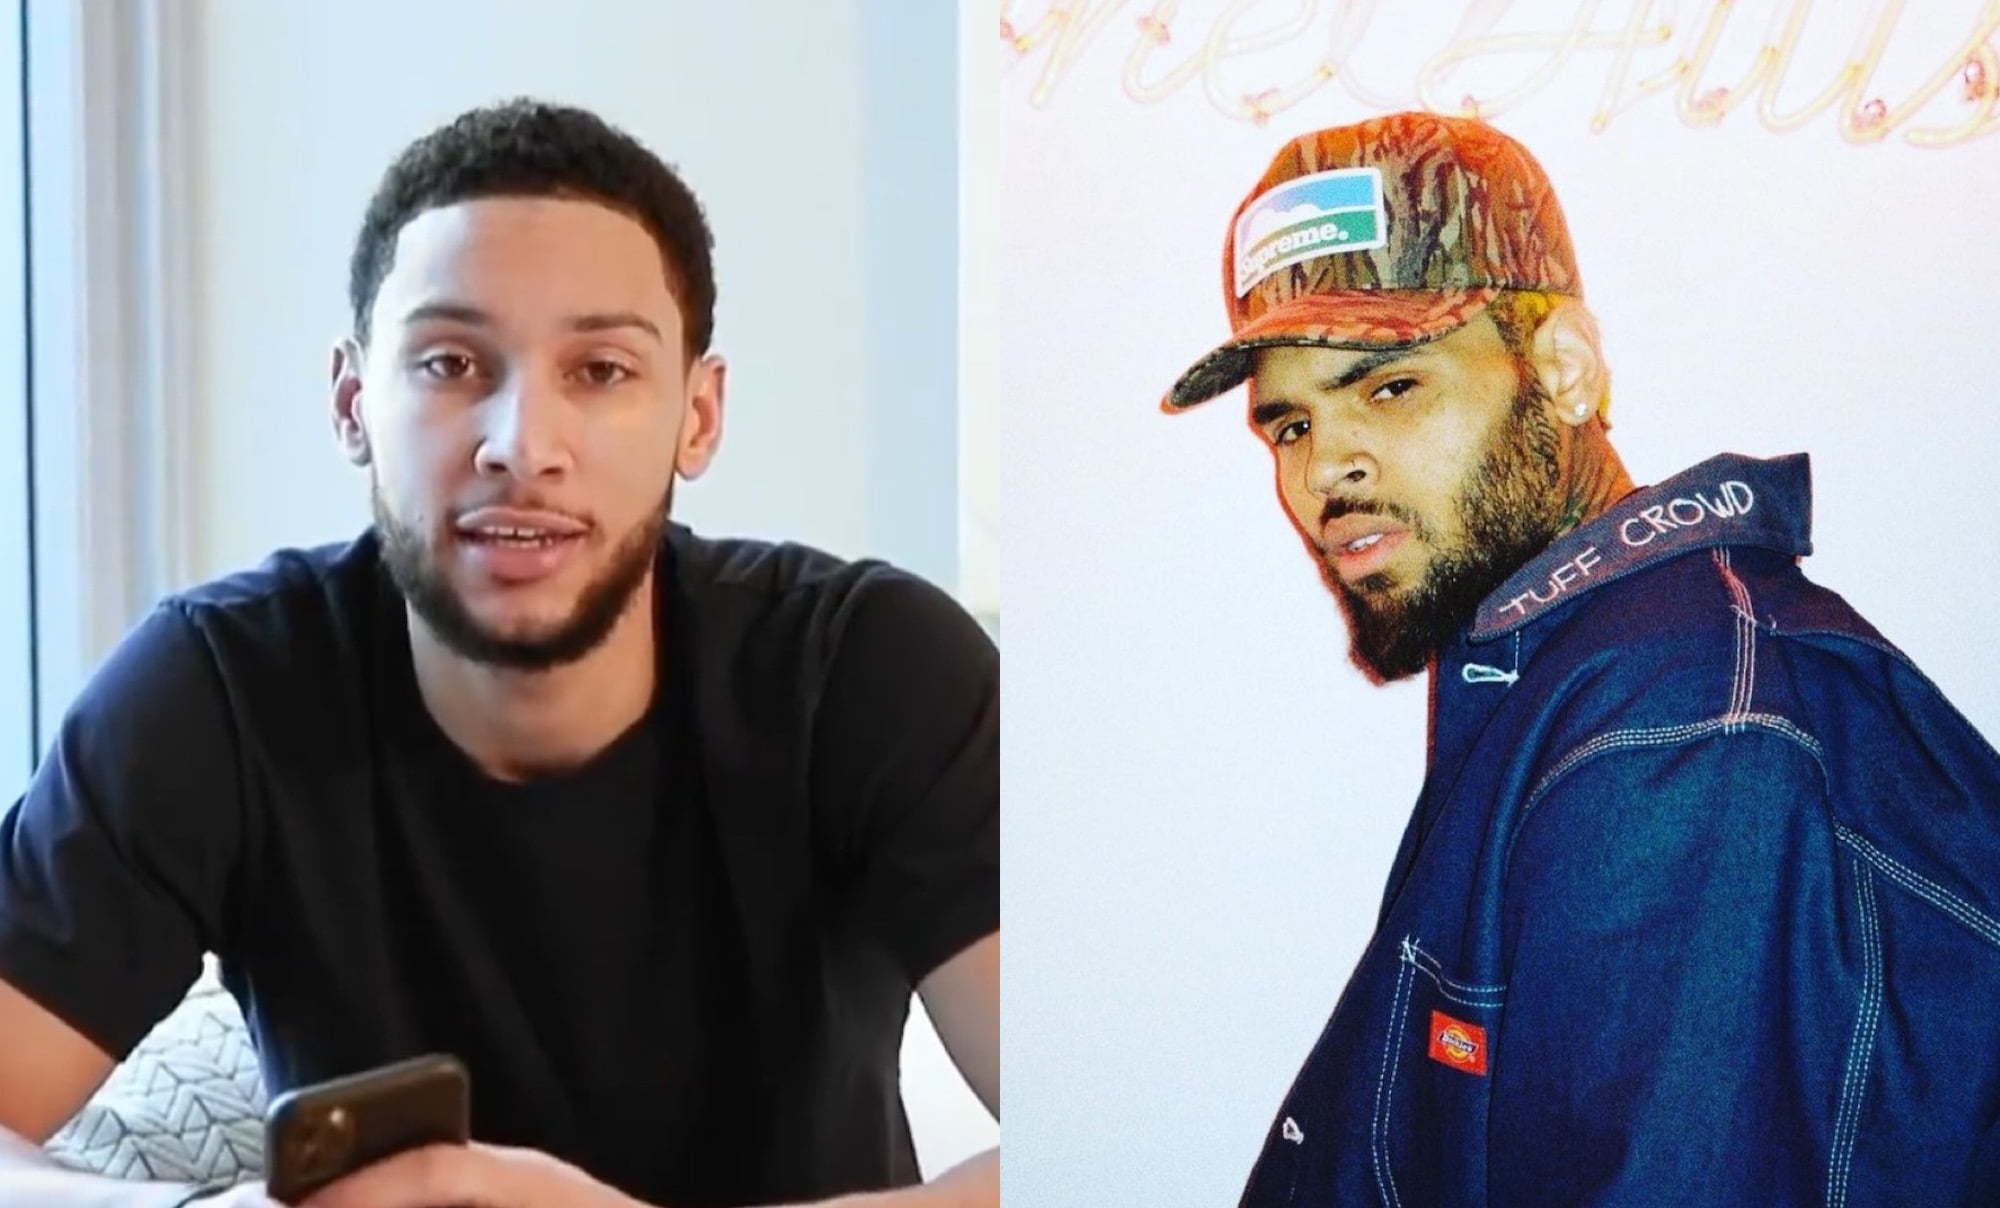 Chris Brown Lashes Out At Ben Simmons Comparison, "Stop Playing With Me